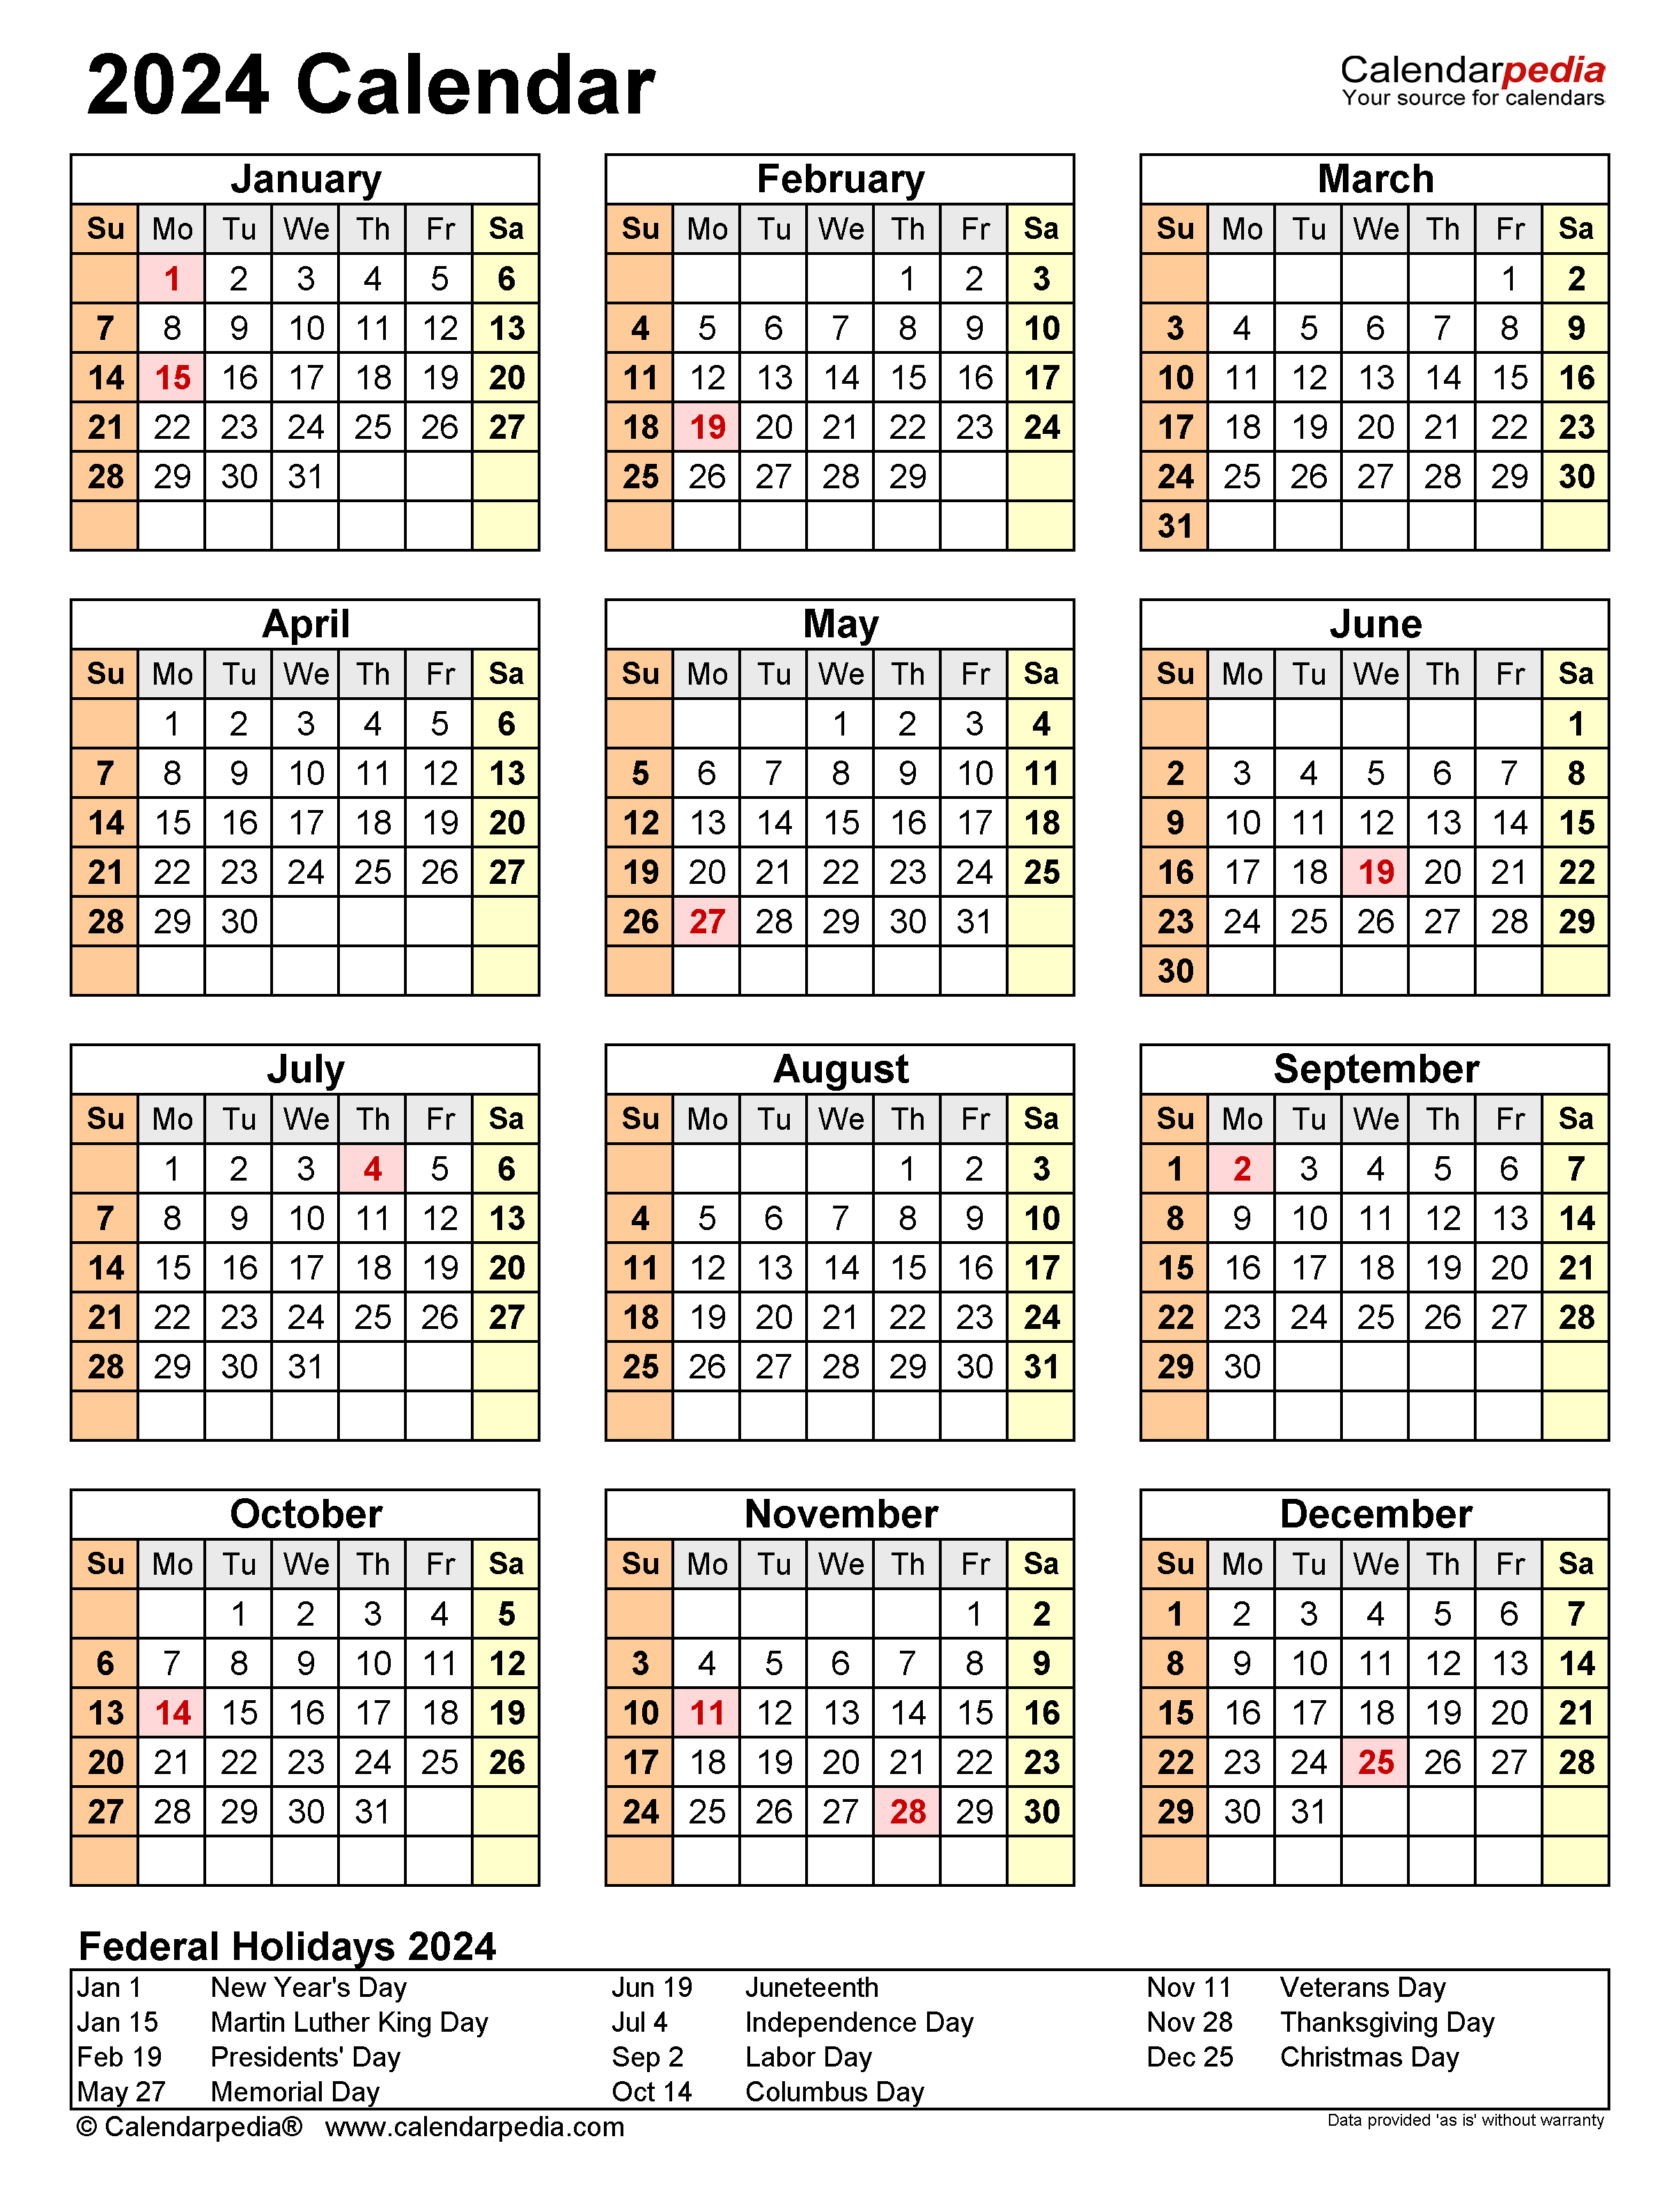 Free Printable 2024 Monthly Calendar With Holidays - Free Printable 2024 Calendar With Holidays For Trinidad And Tobago